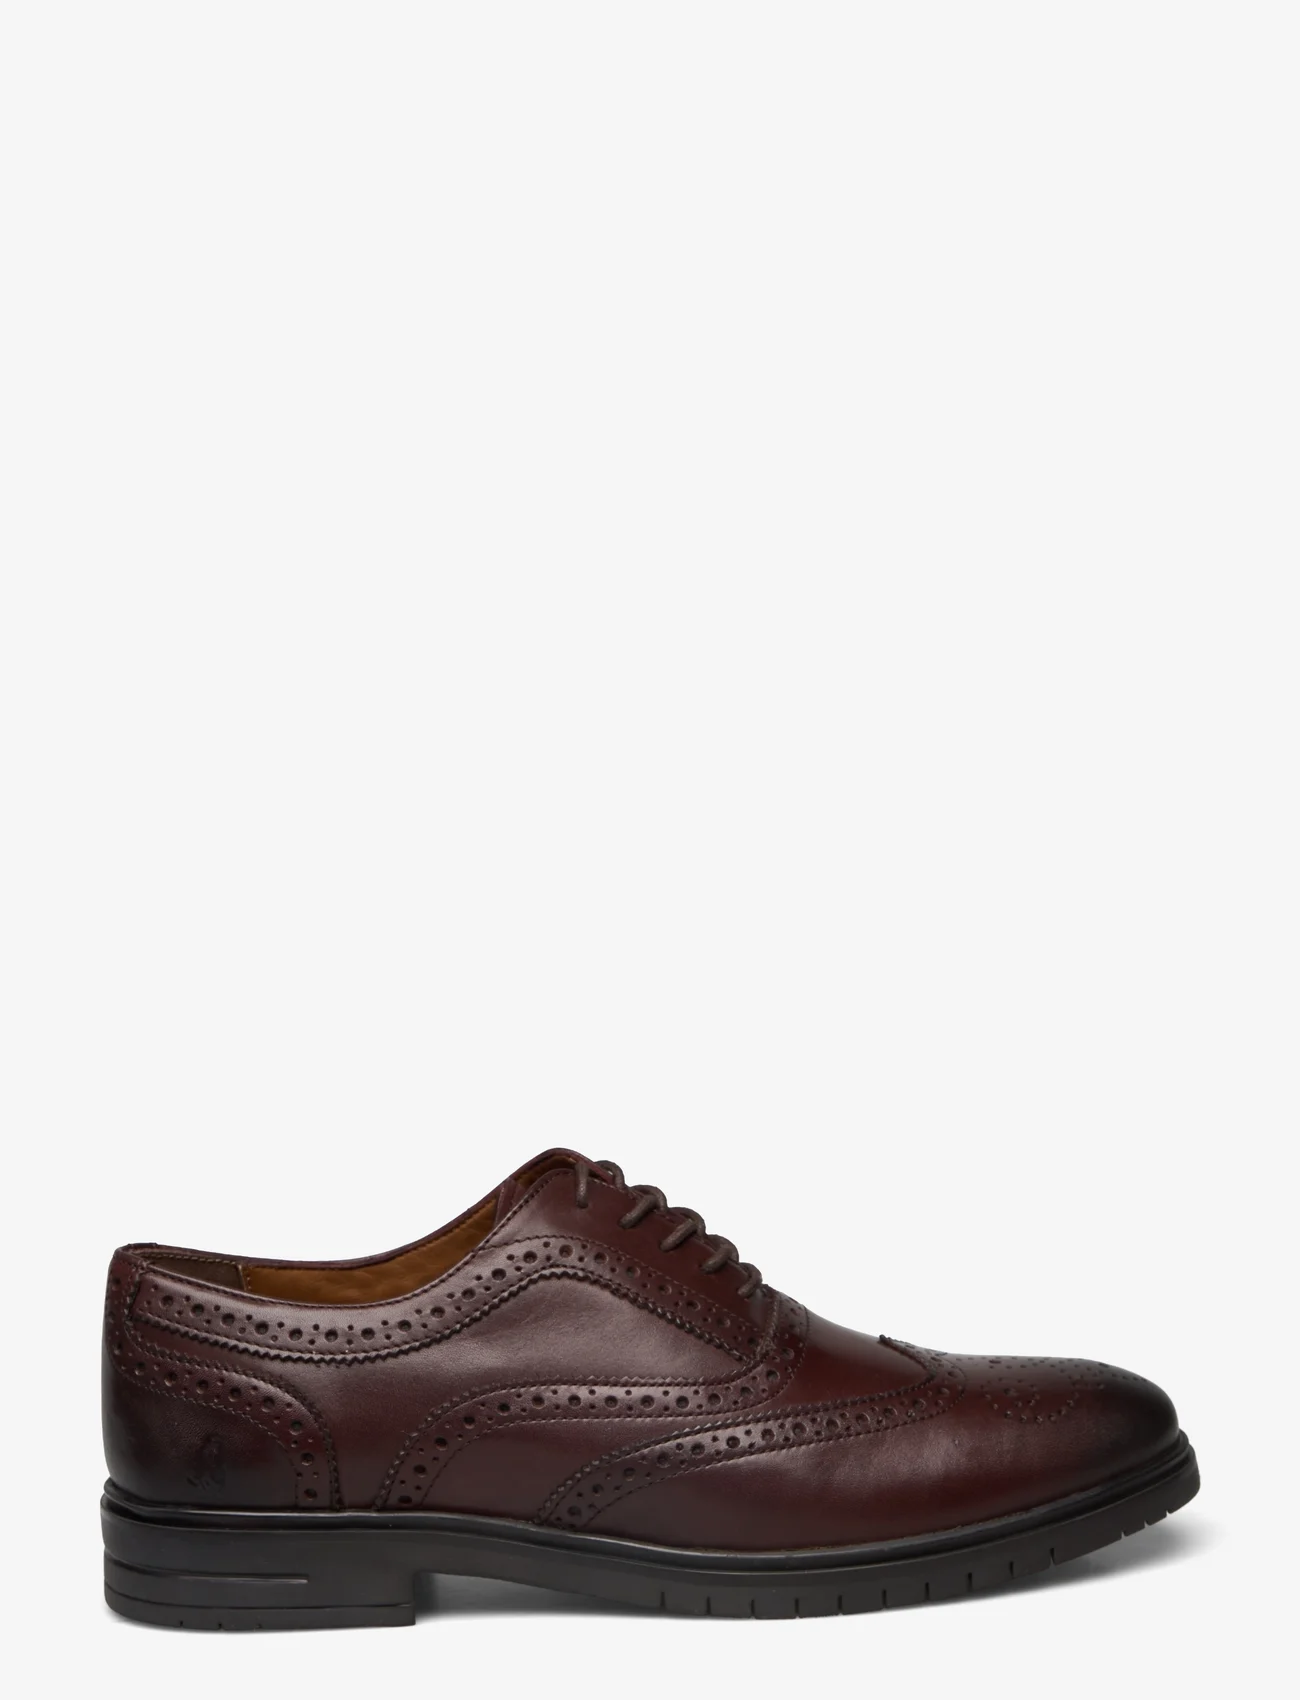 Hush Puppies - ALMATI BROUGE - spring shoes - brown - 1